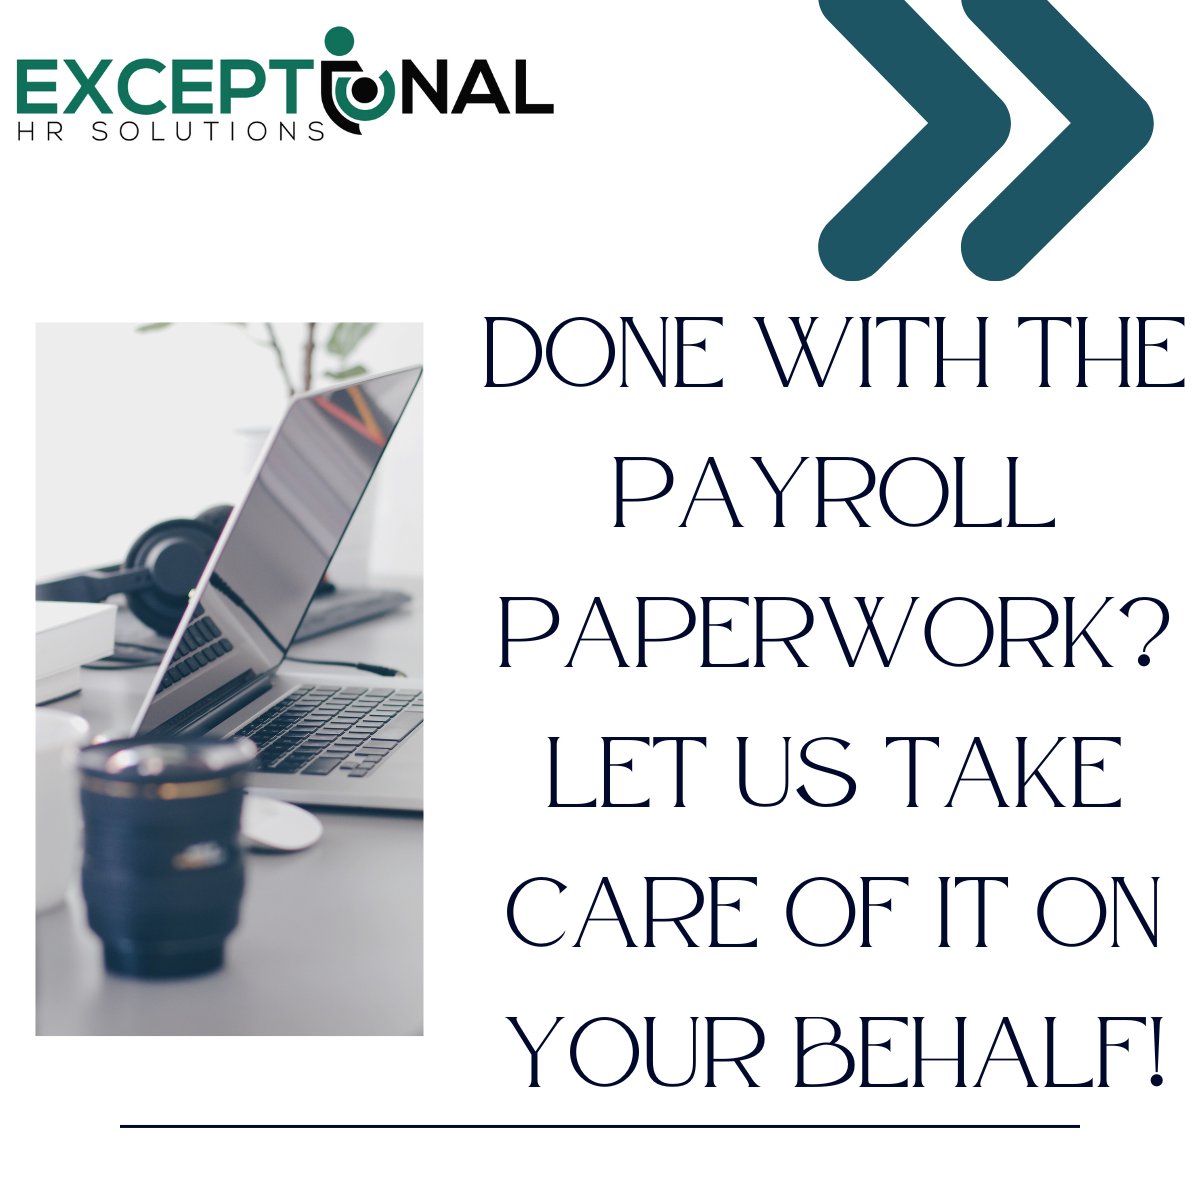 Take the complexity out of payroll management with our efficient services!
#payroll #payrollservices #hr #HumanResources
Contact us at Payroll@exceptionalhrsolutions.com
Schedule a meeting: tidycal.com/exceptionalhrs…

@exceptionalhrs